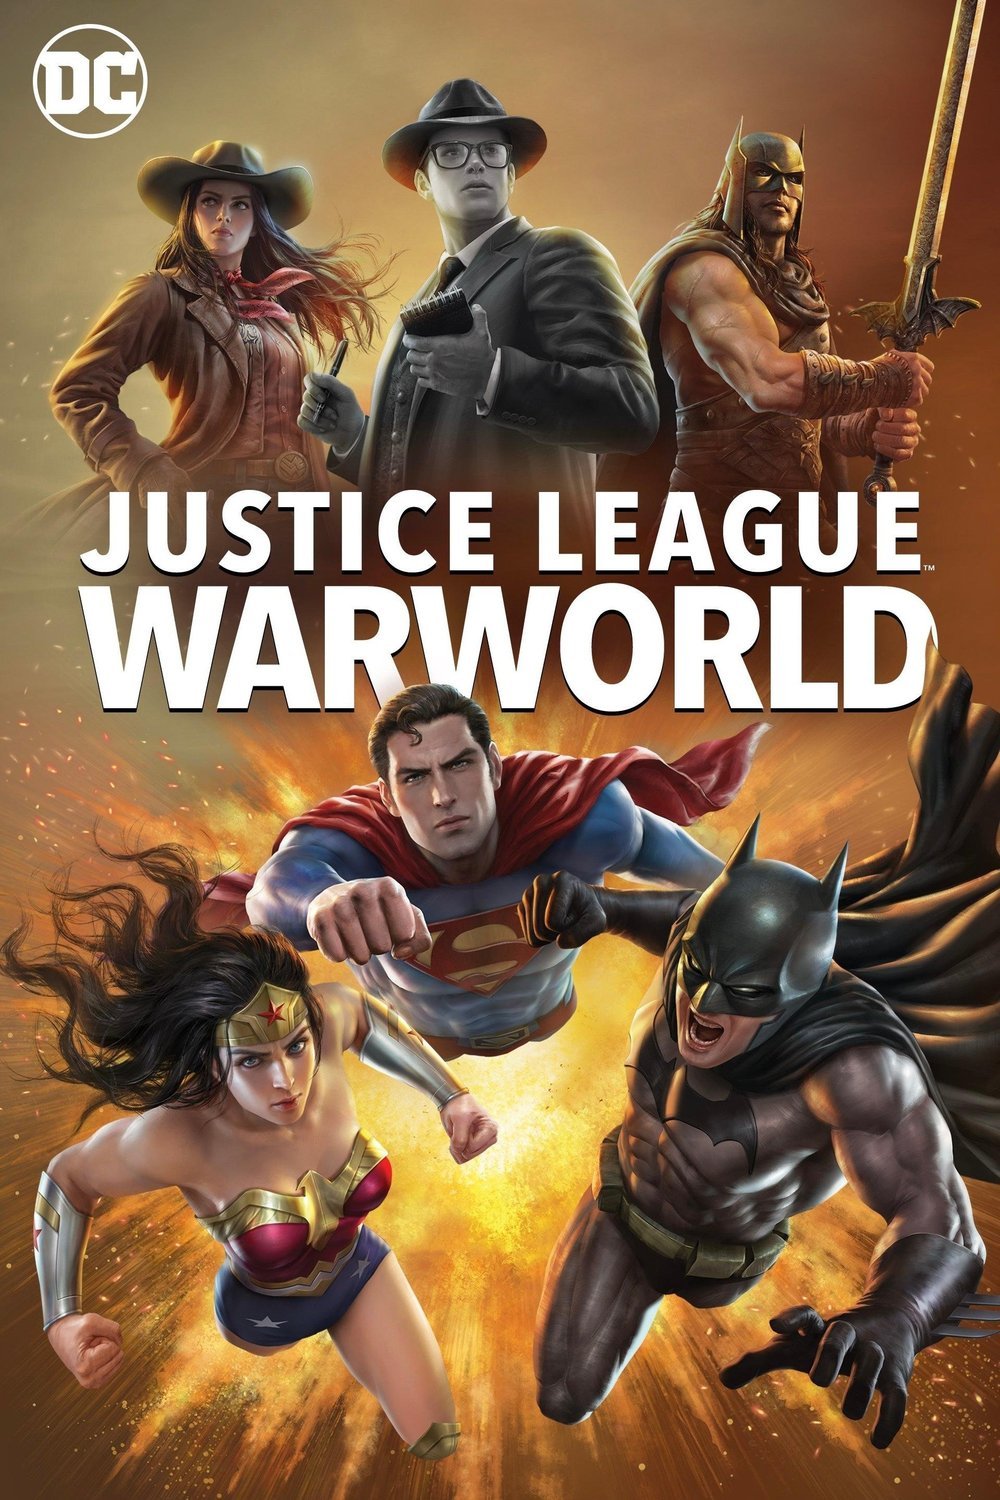 Poster of the movie Justice League: Warworld